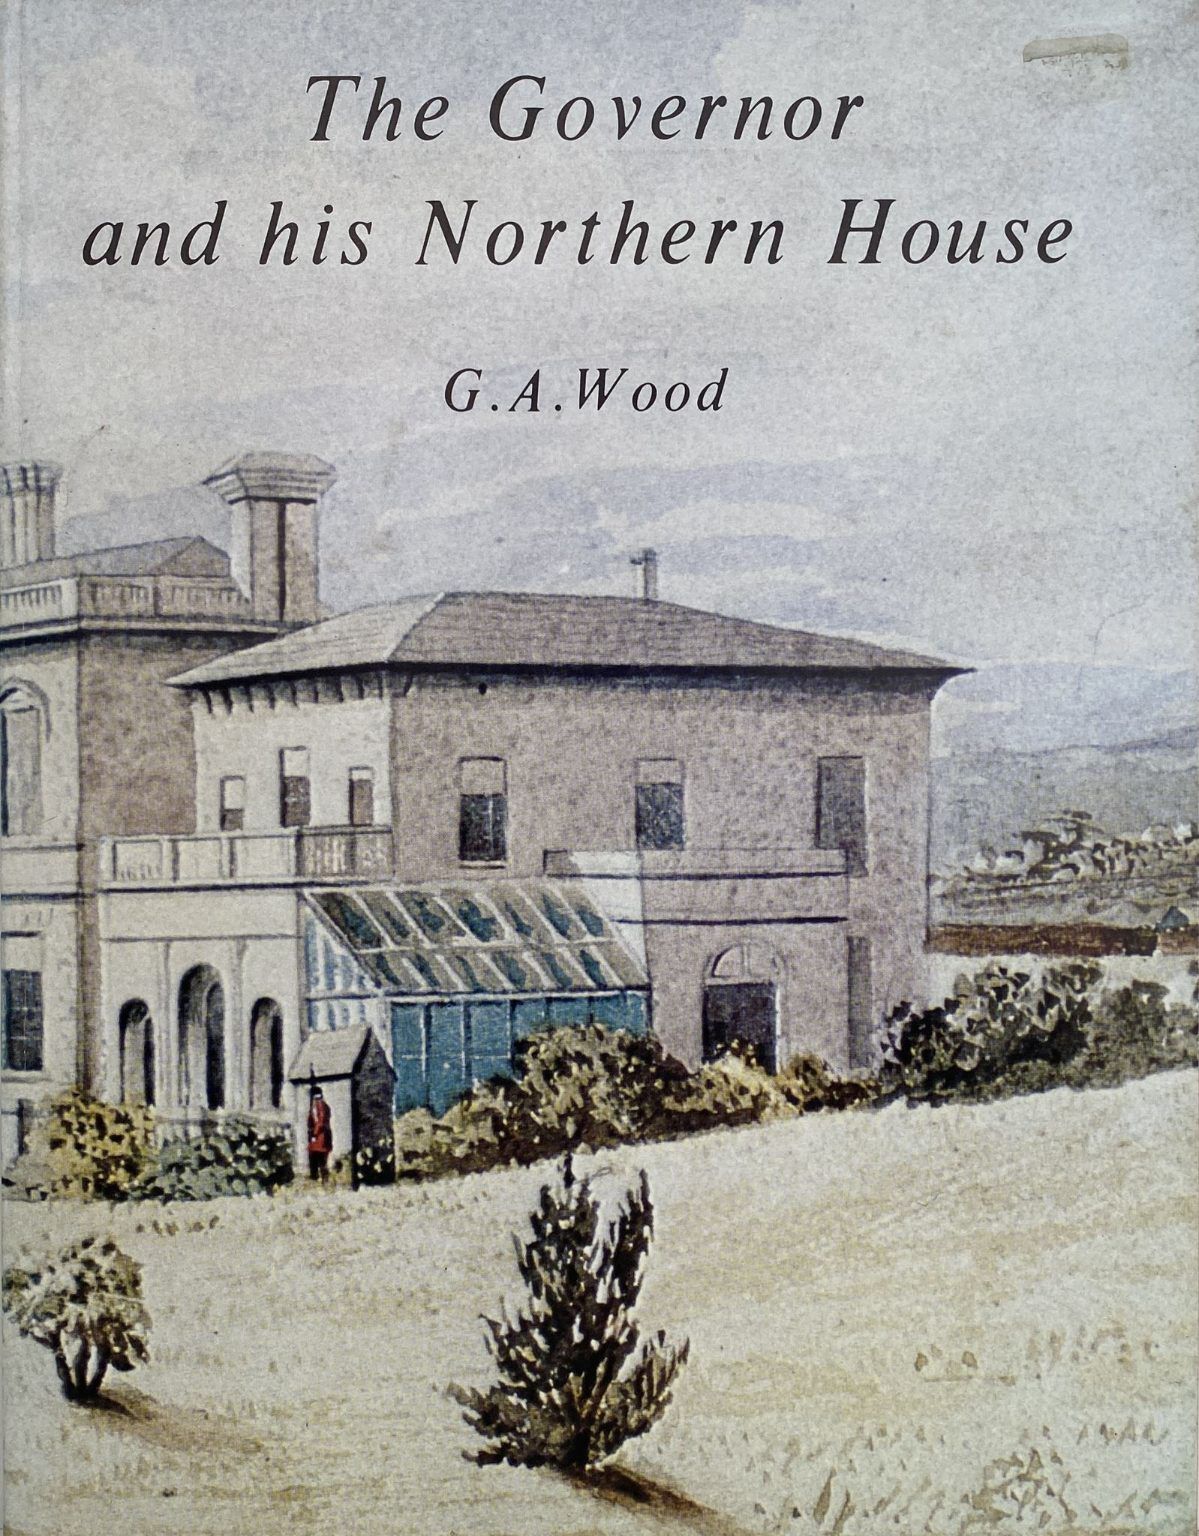 The Governor and his Northern House